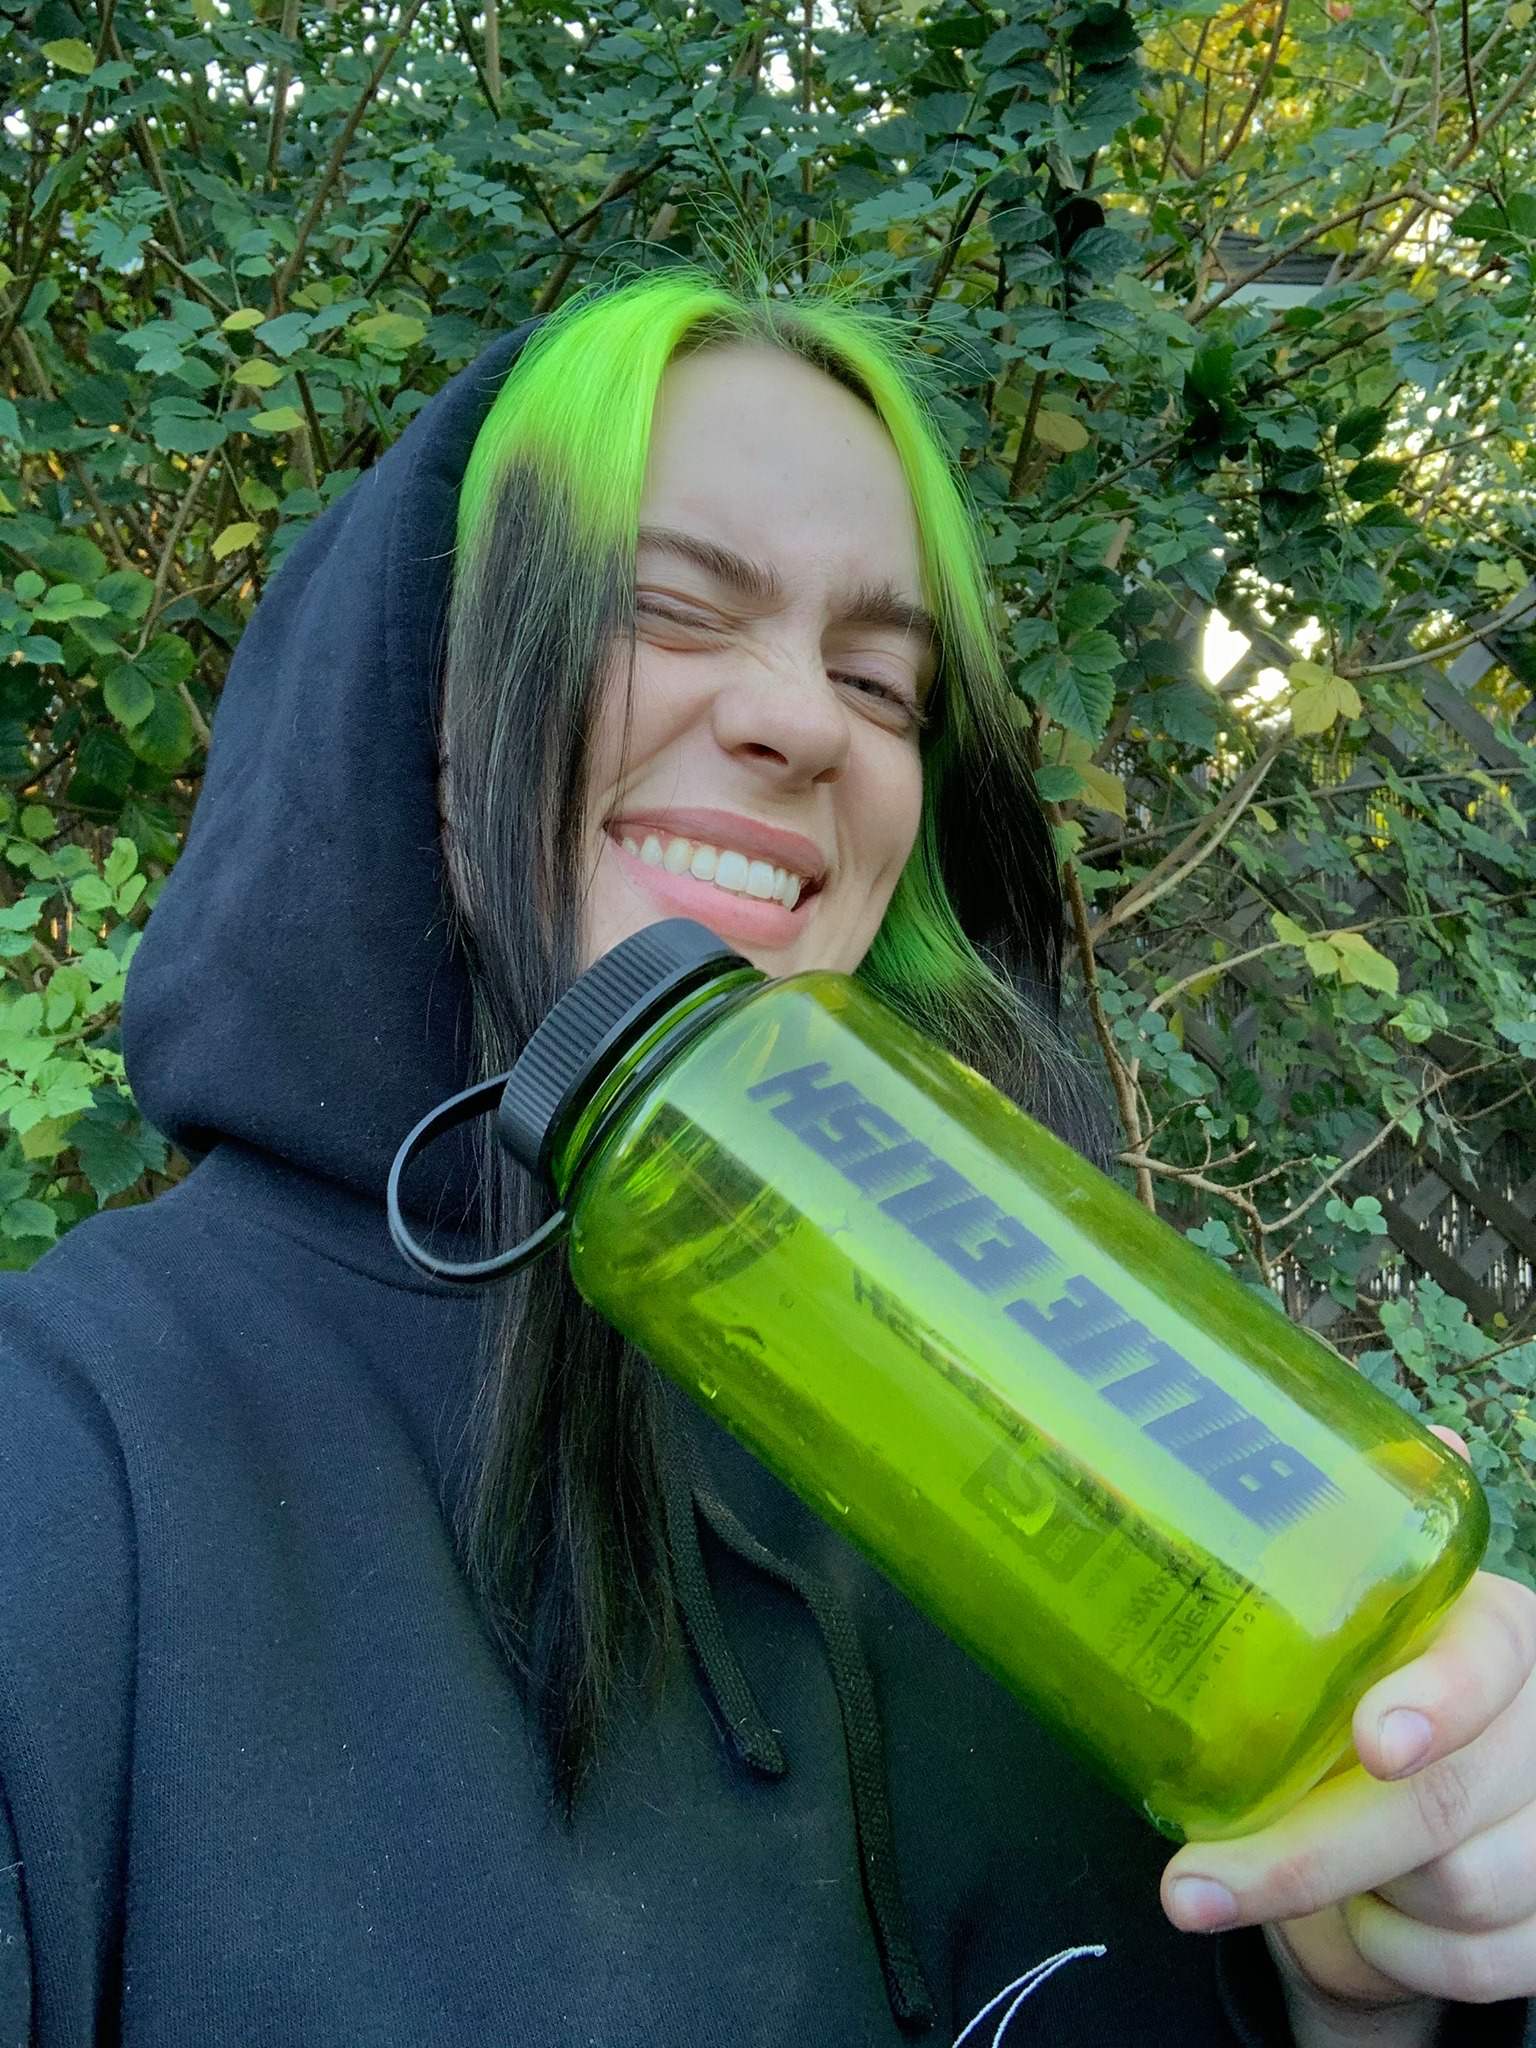 'i thought it's rxz member, but it's billie eilish' - netizens rage over rubbish littering after concert